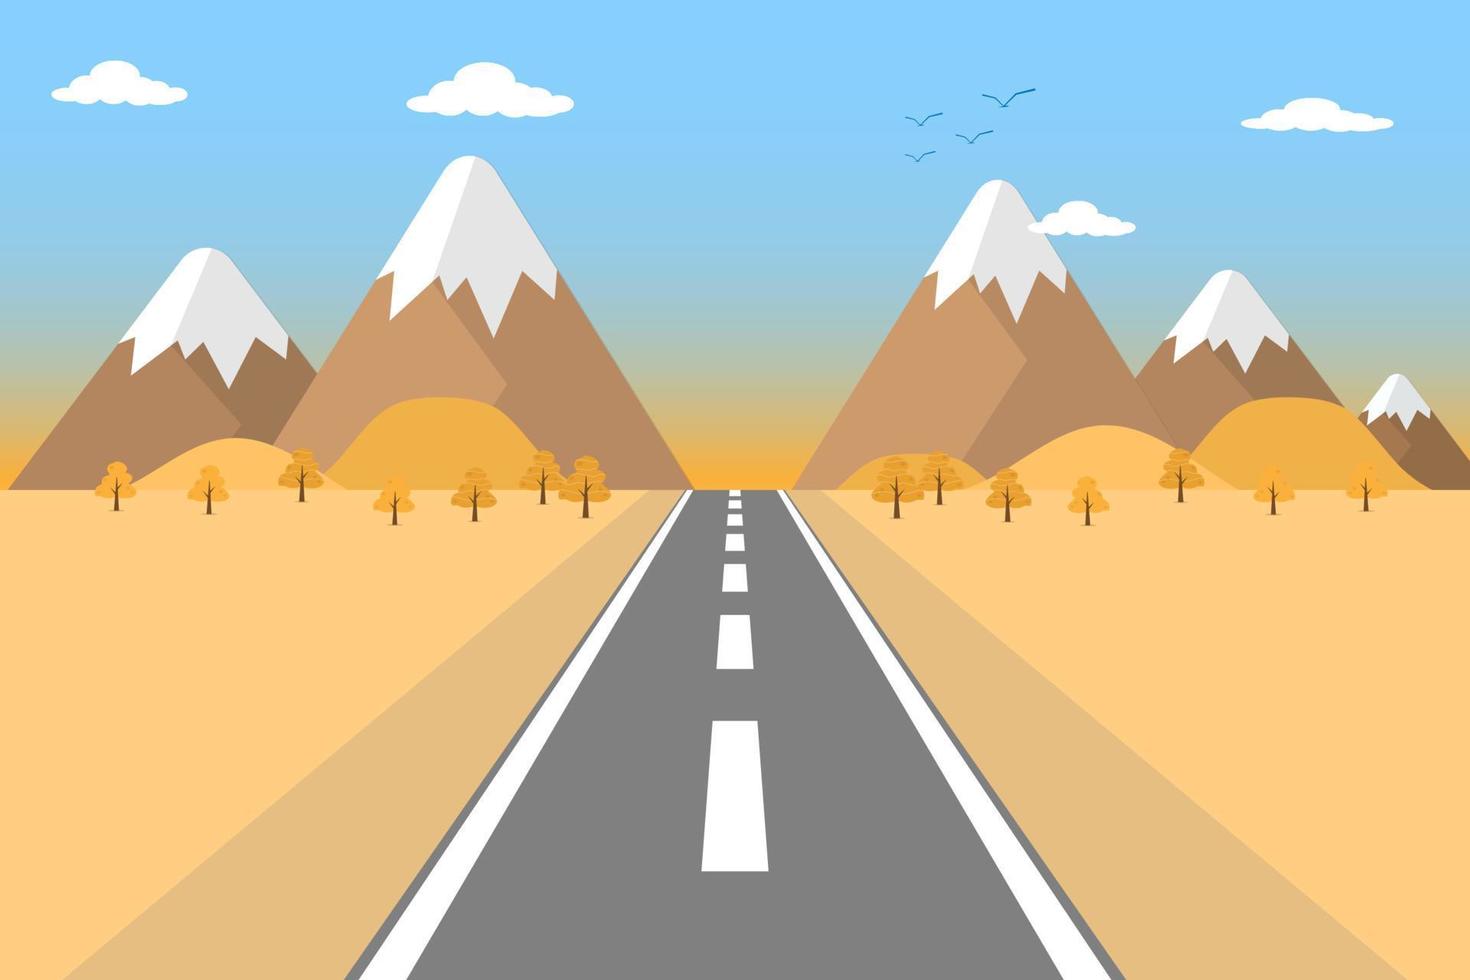 Vector landscape background. Road in nature field, mountains, hills, clouds on blue sky. Flat style illustration of autumn and spring nature.